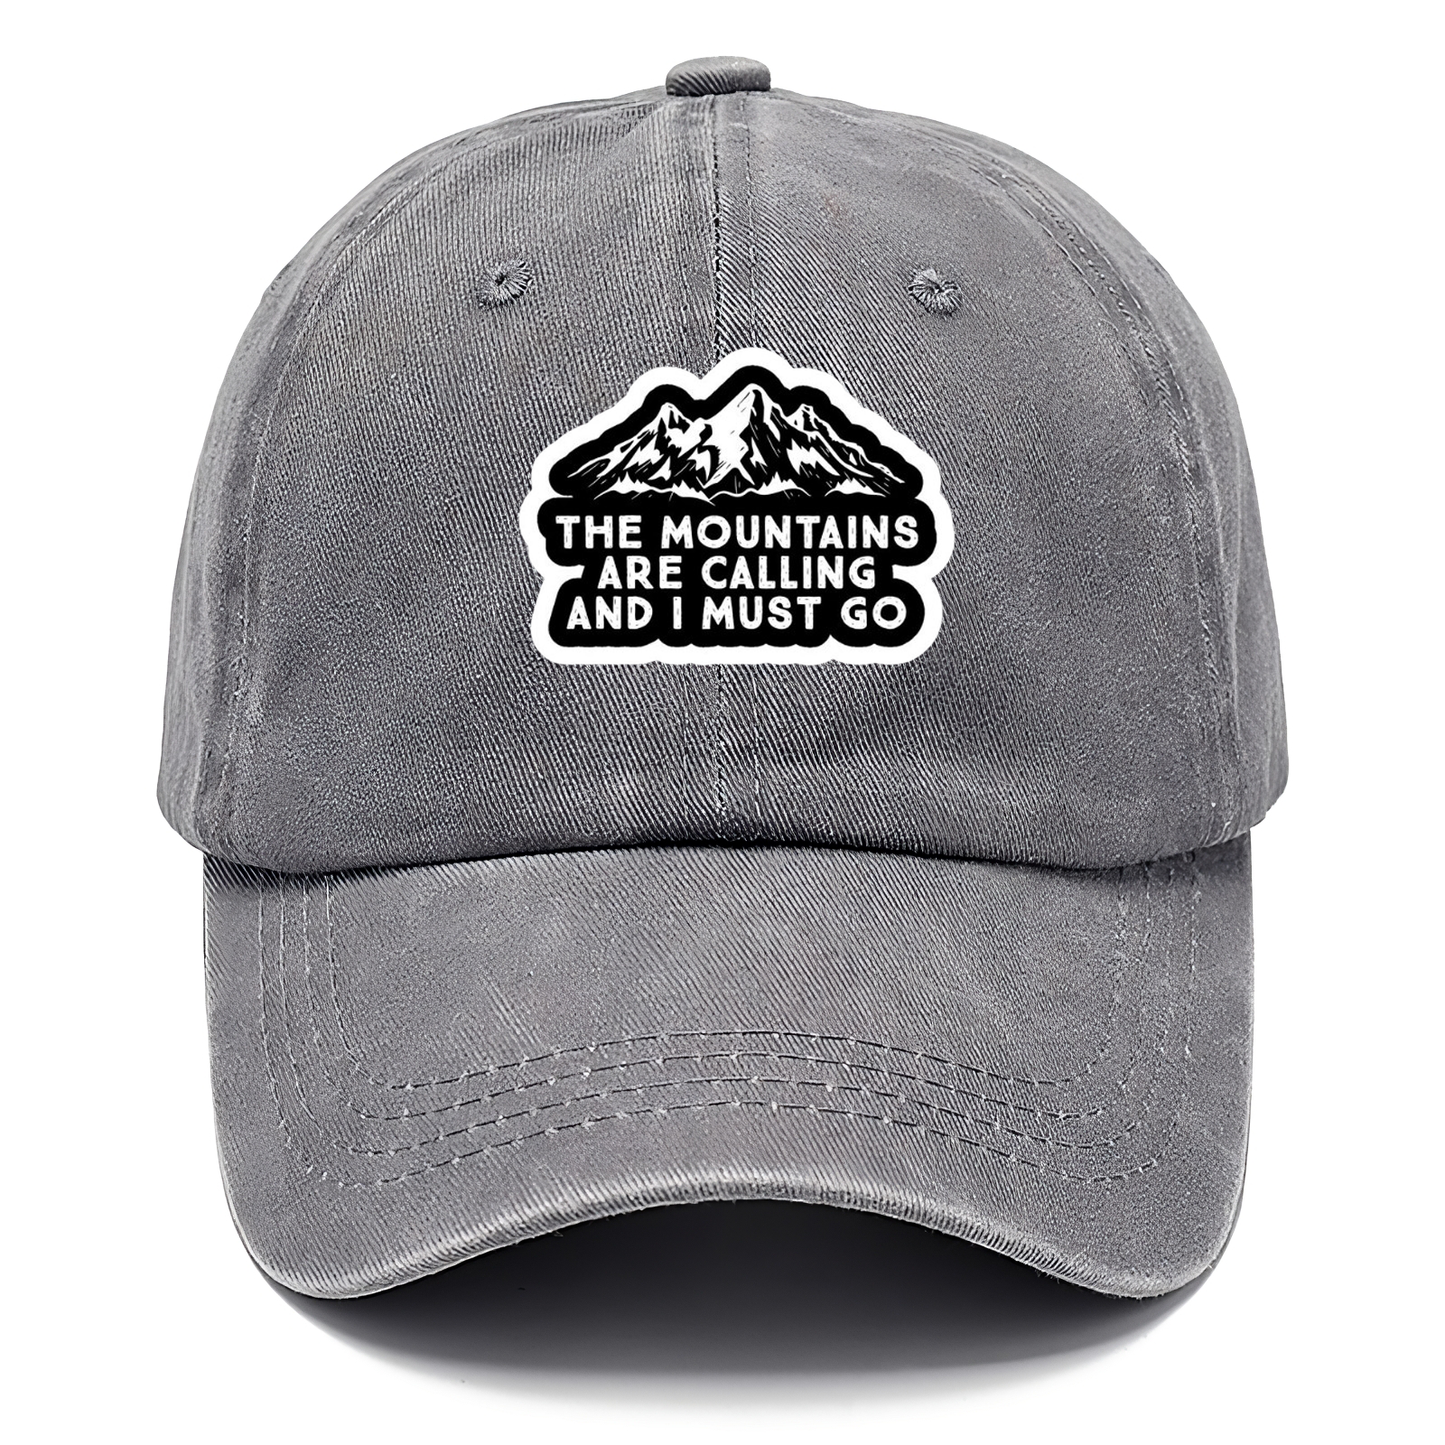 The Mountains Are Calling And I Must Go Classic Baseball cap